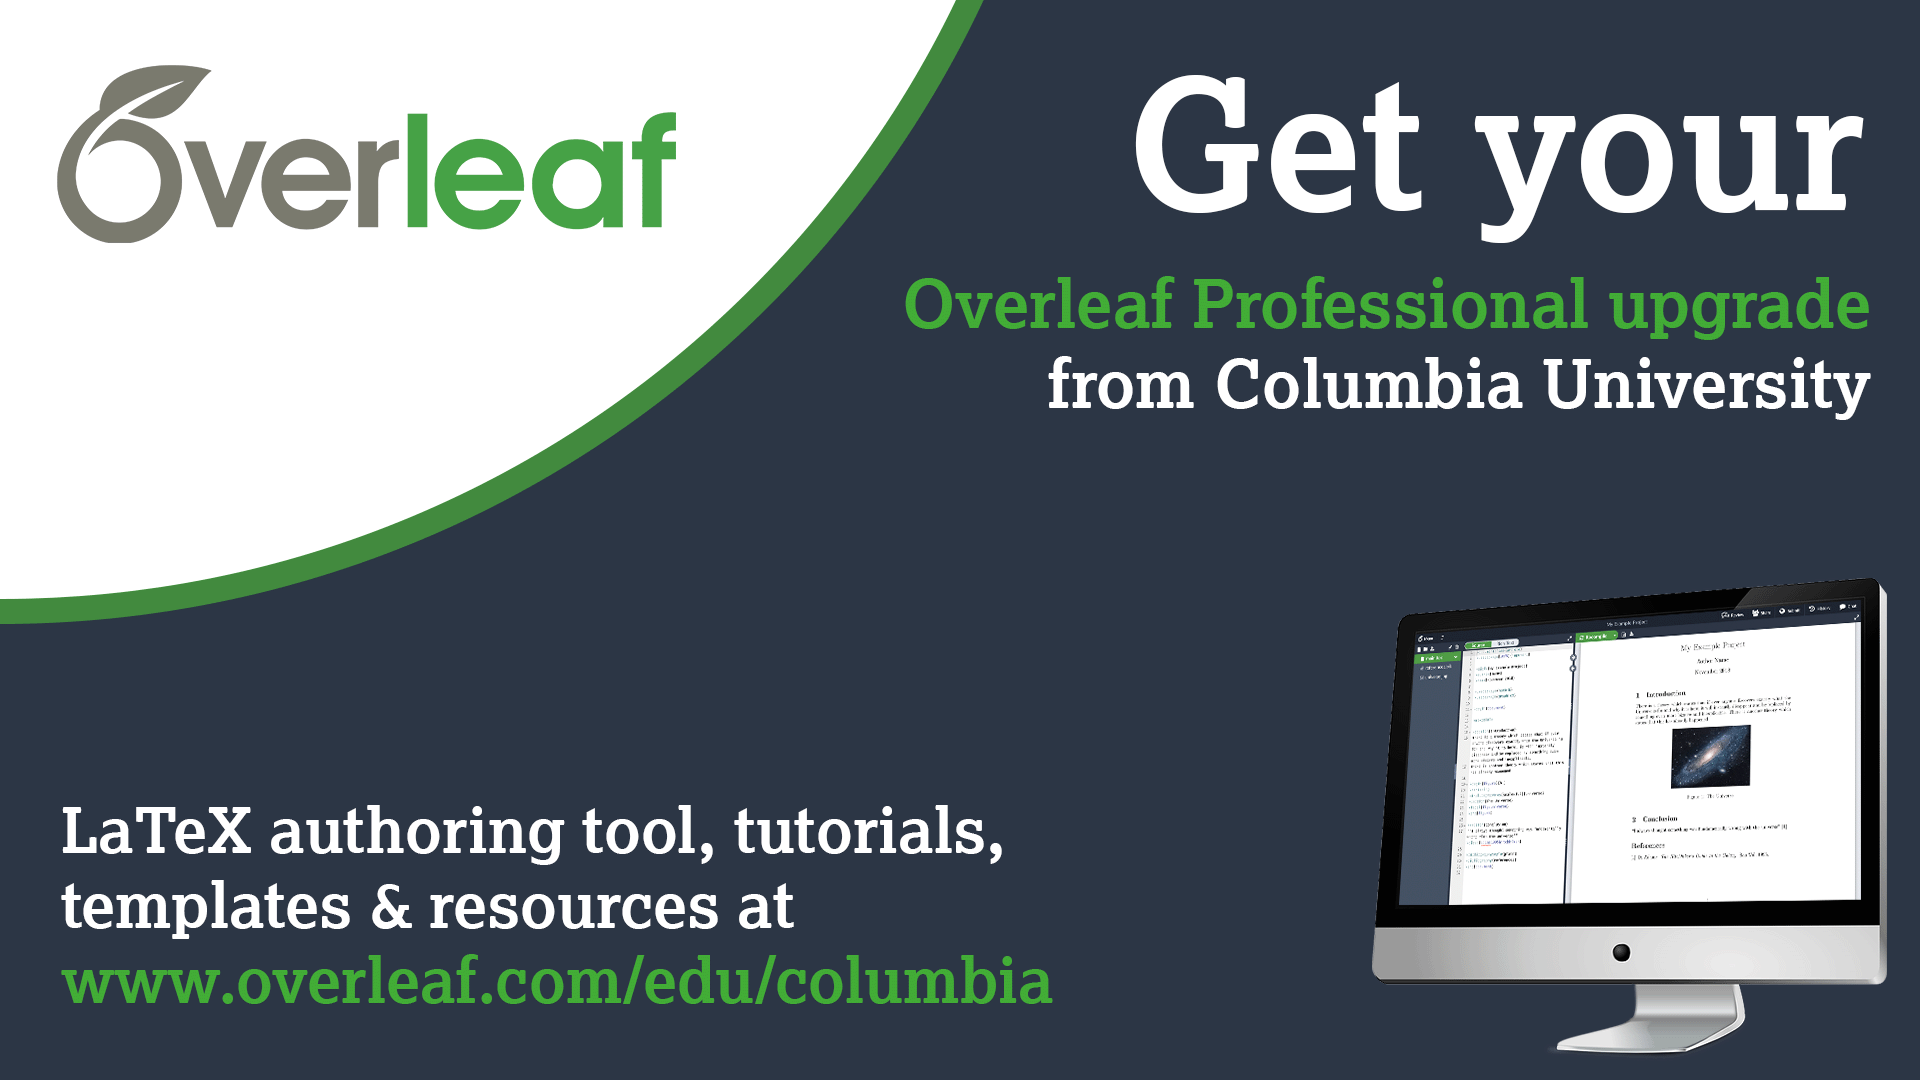 Overleaf banner reading: Overleaf, Get your Overleaf Professional upgrade from Columbia UniversityLaTeX authoring tool, tutorials, templates & resources at www.overleaf.com/edu/columbia